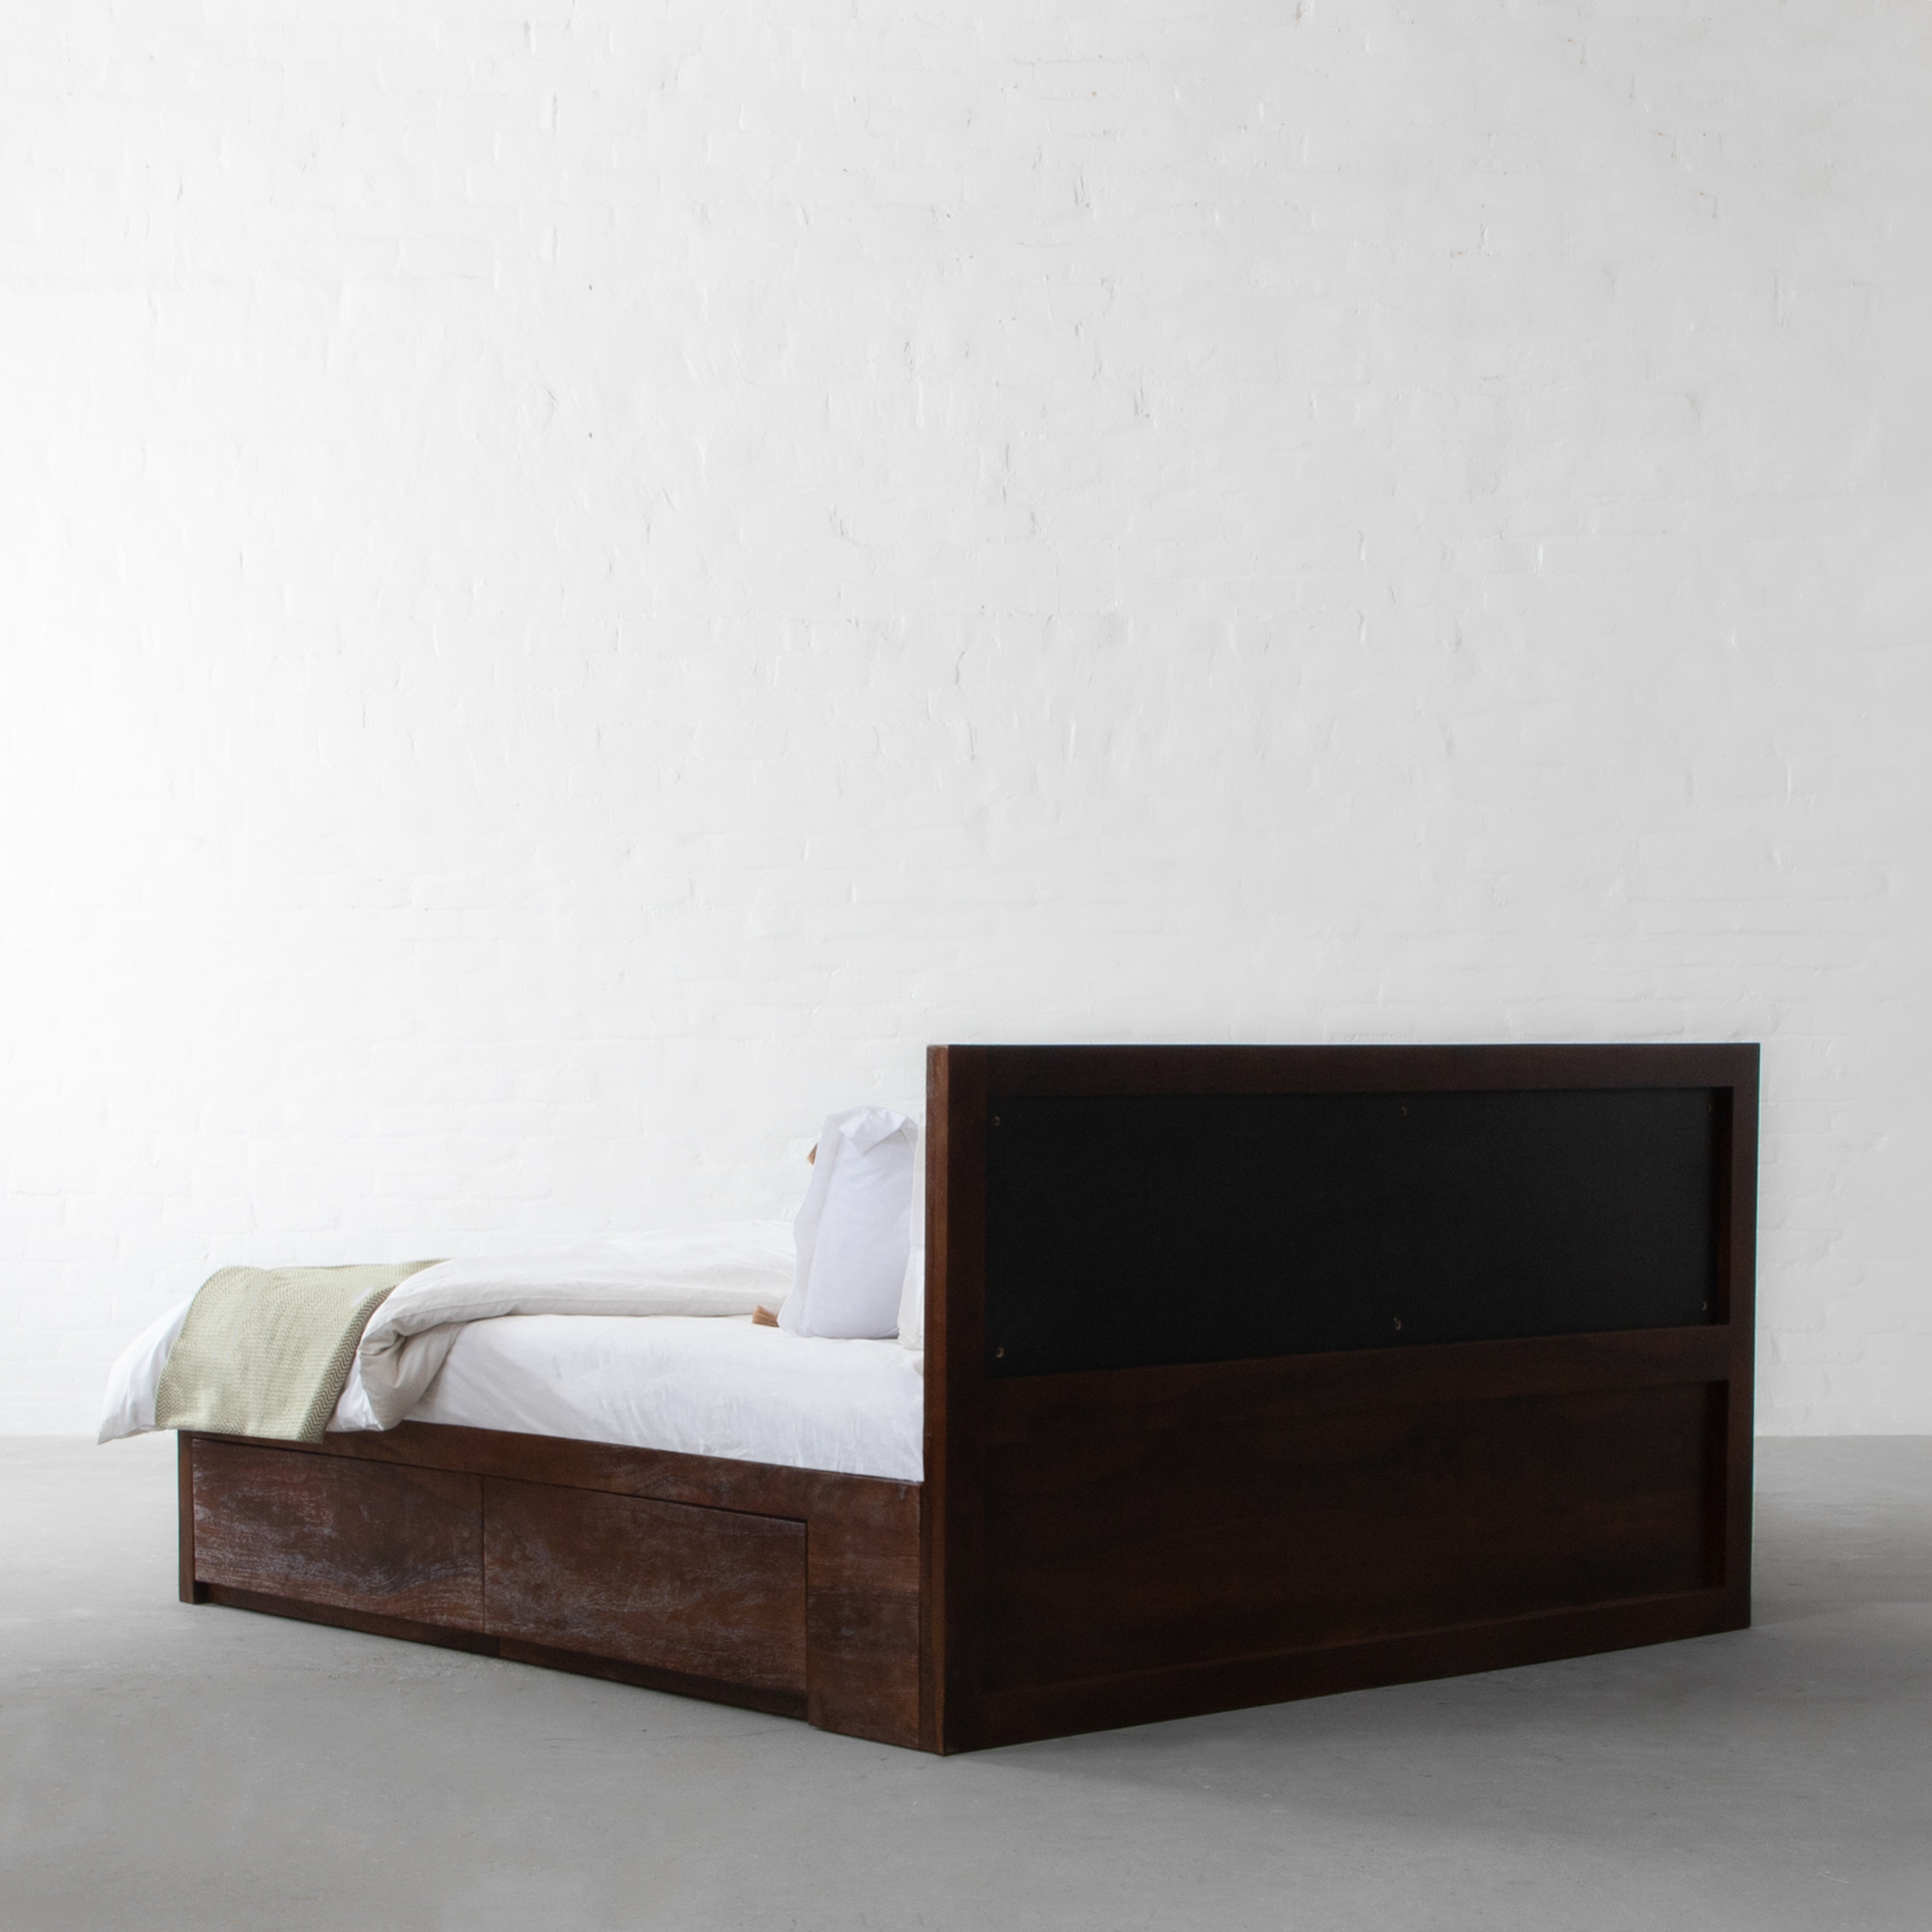 Lyon French Bed Collection with Drawer Storage